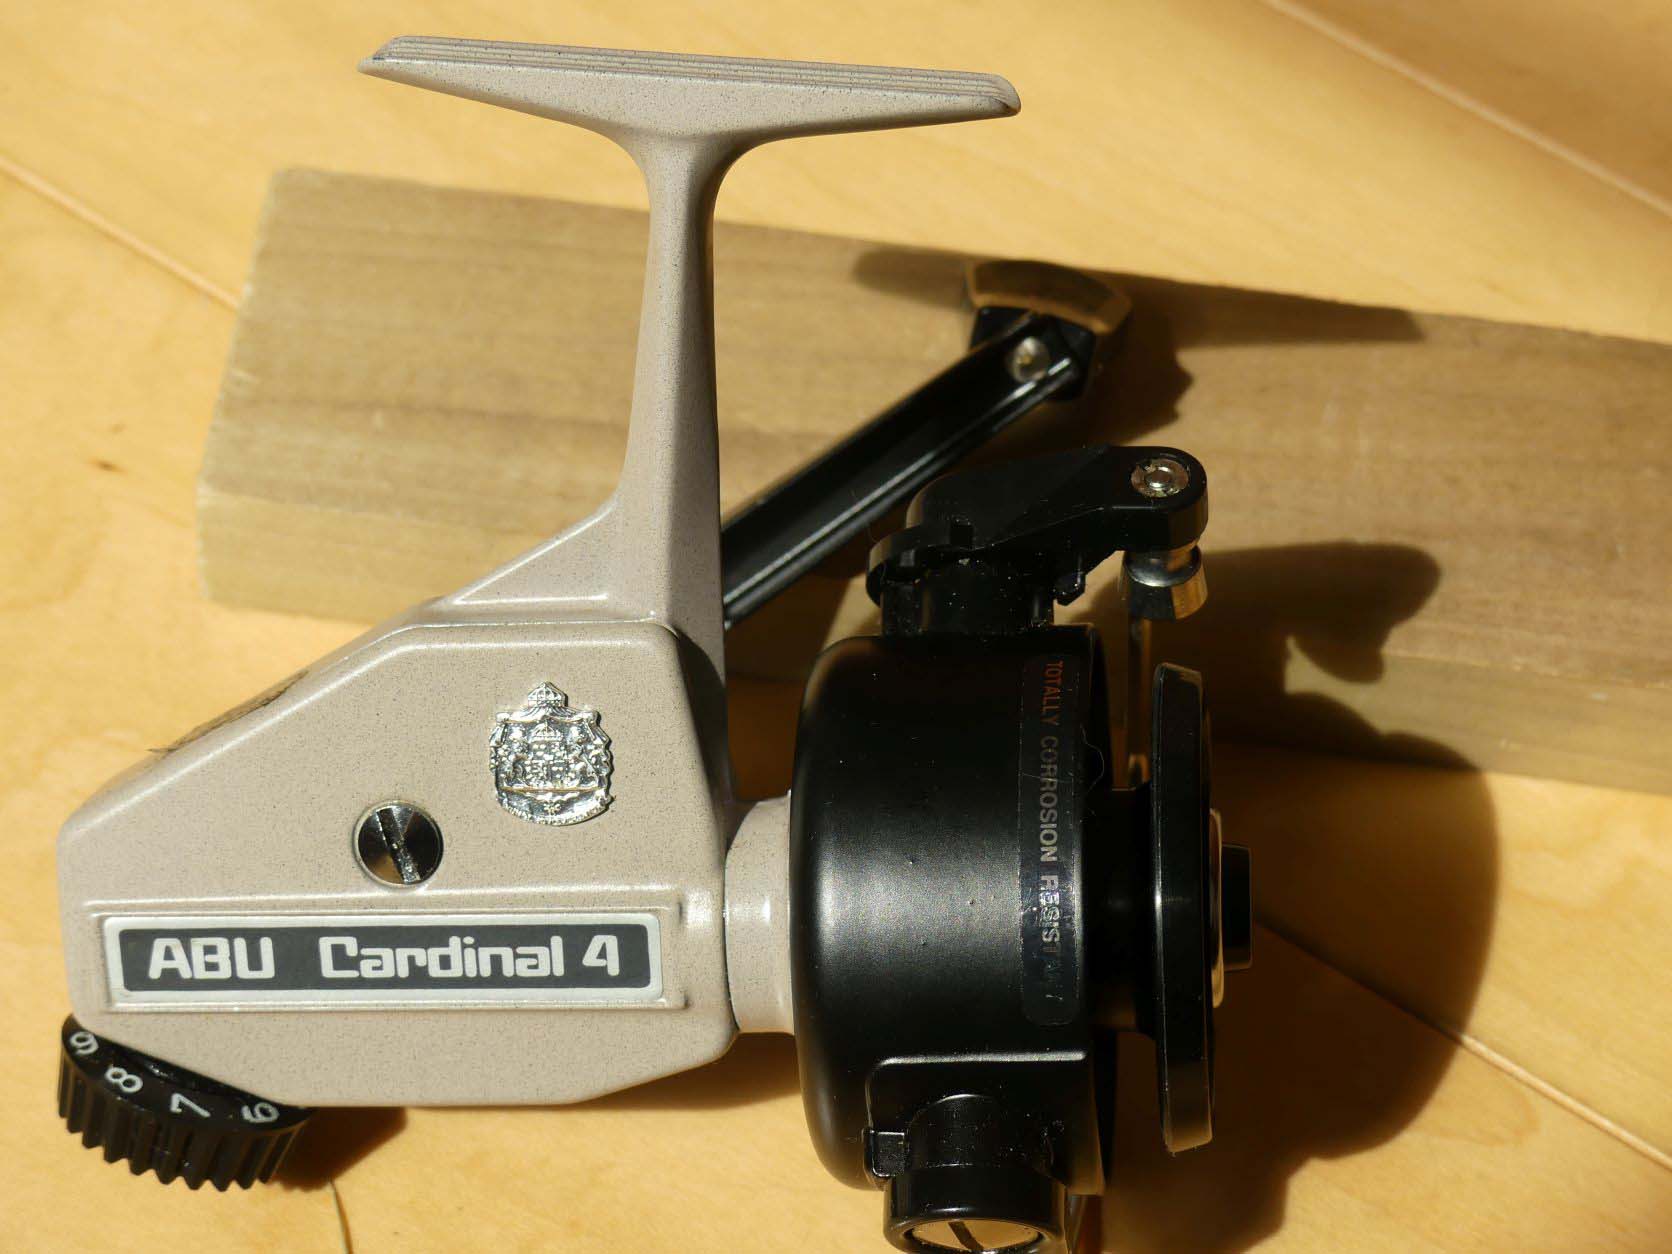 ABU Cardinal 4 spinning reel with box and extras